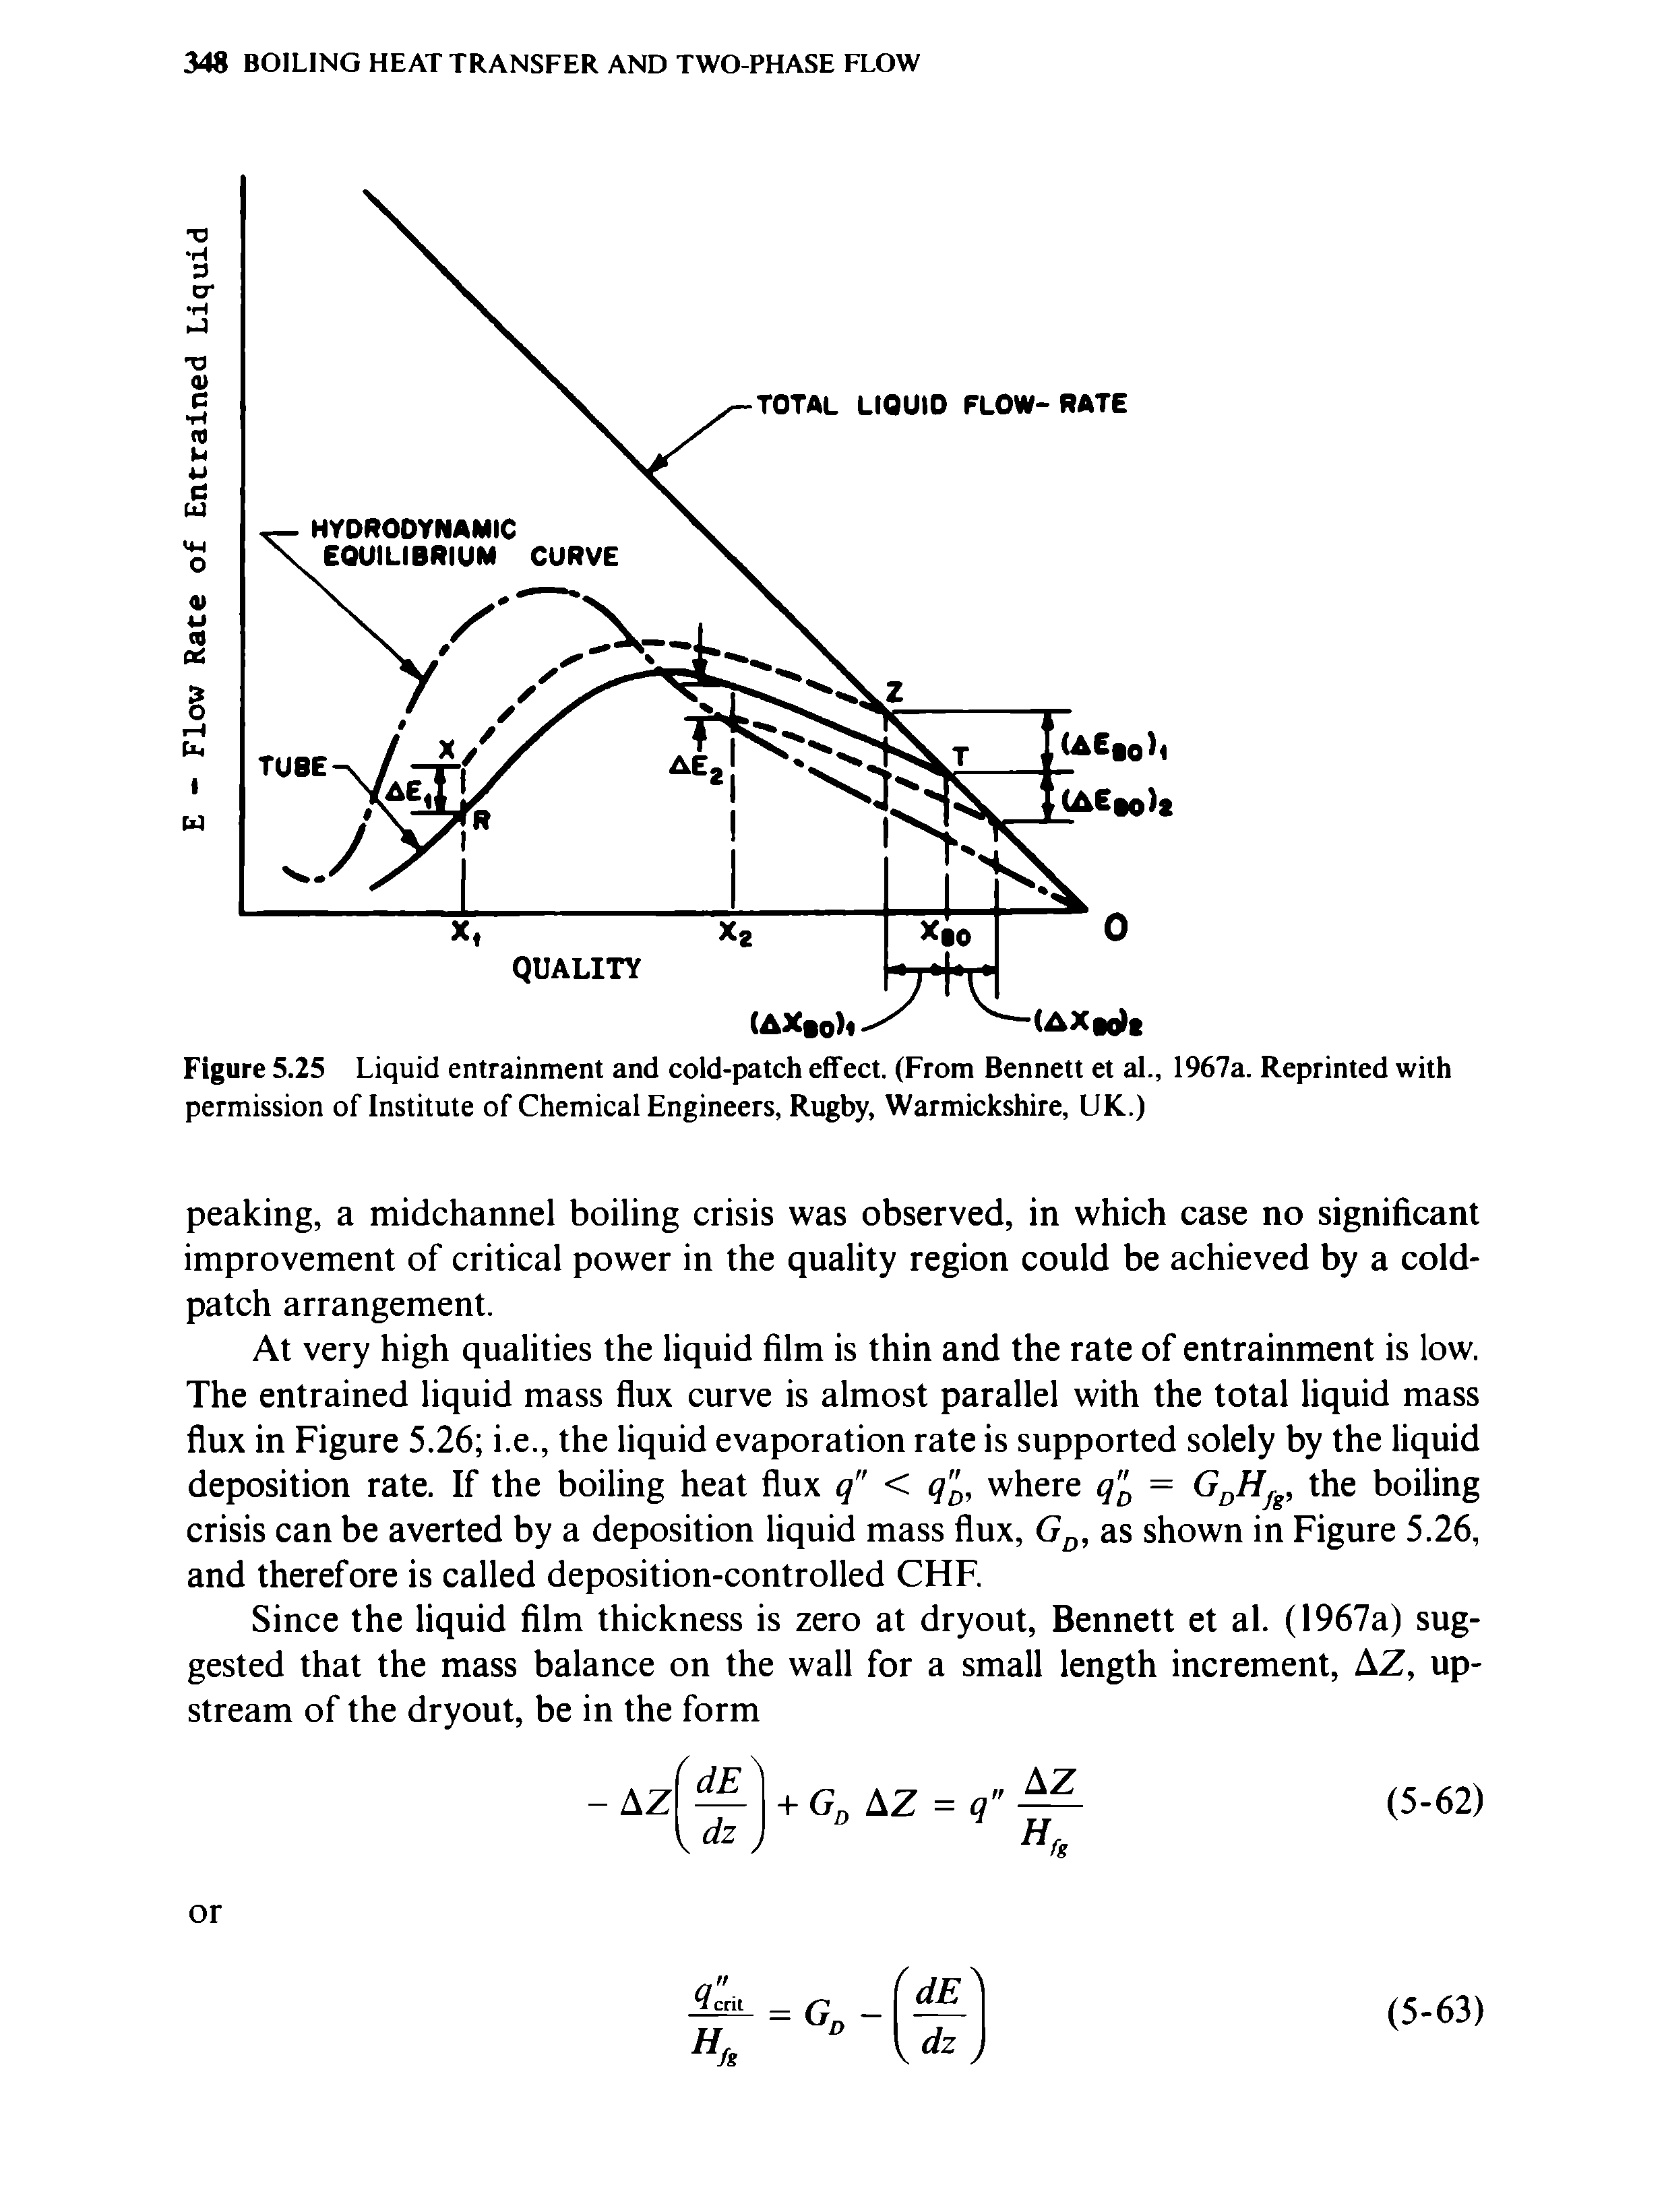 Figure 5.25 Liquid entrainment and cold-patch effect. (From Bennett et al., 1967a. Reprinted with permission of Institute of Chemical Engineers, Rugby, Warmickshire, UK.)...